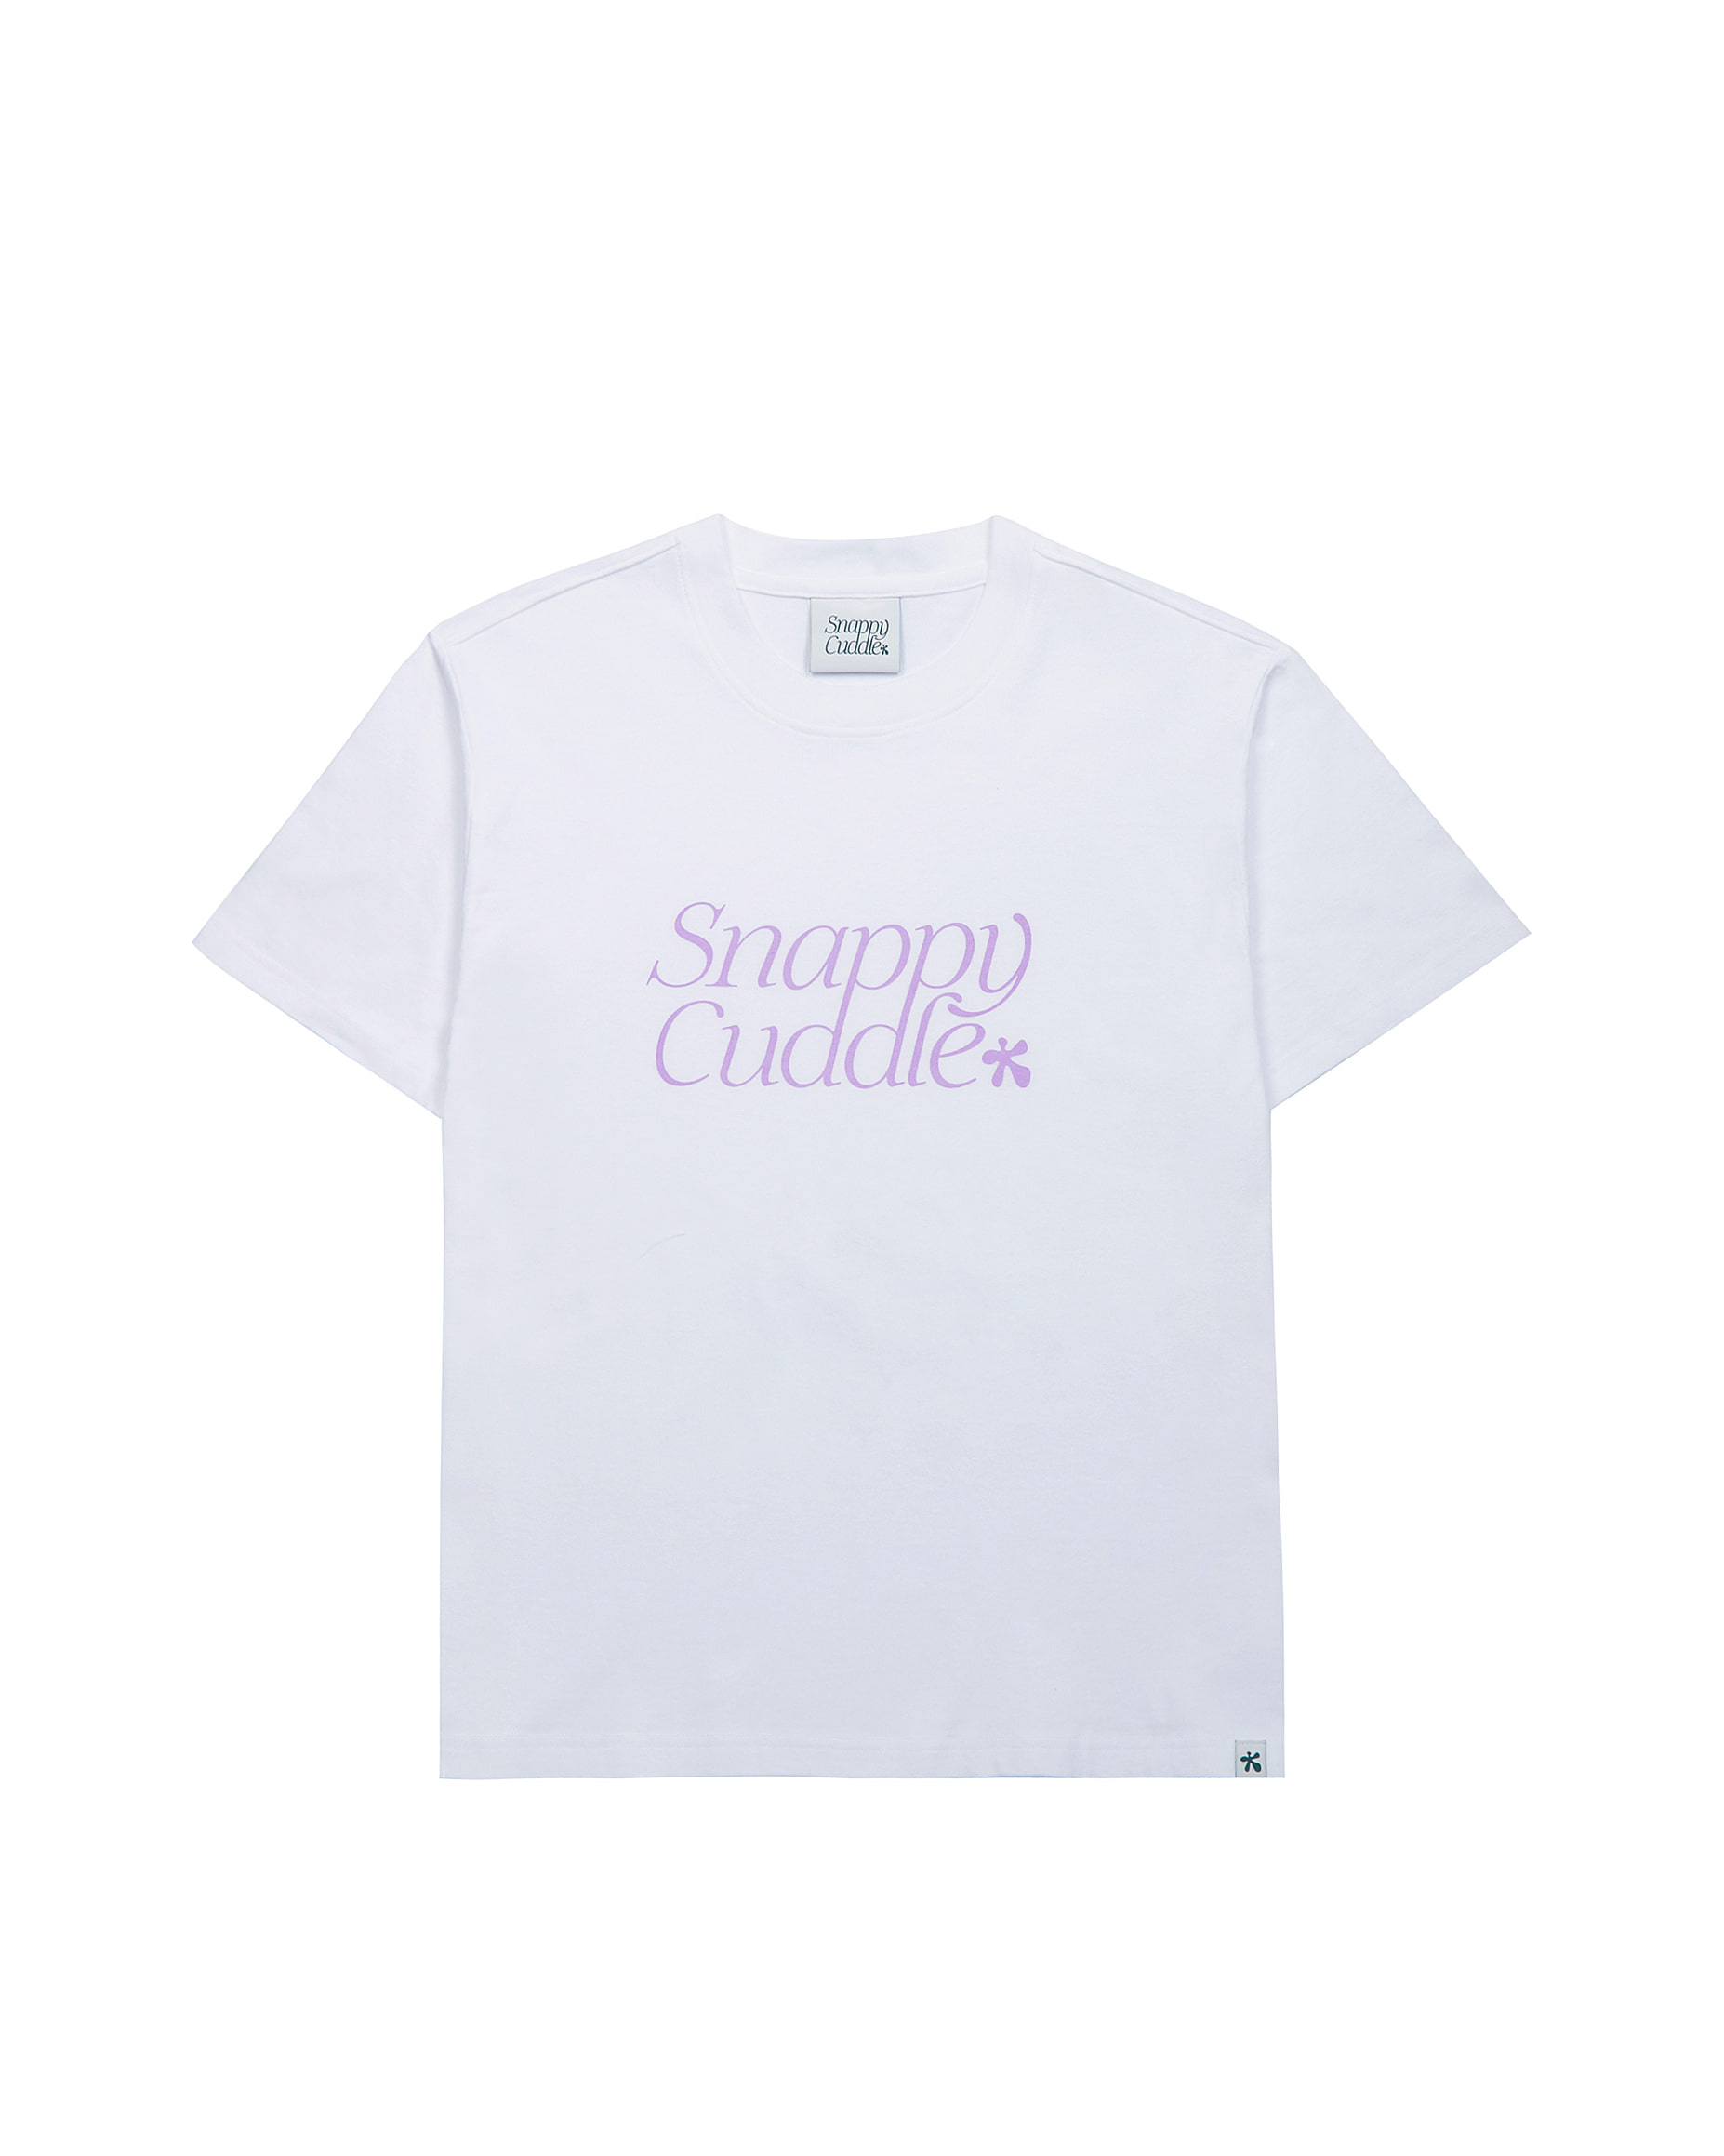 Snappy Room T-Shirts (Violet)